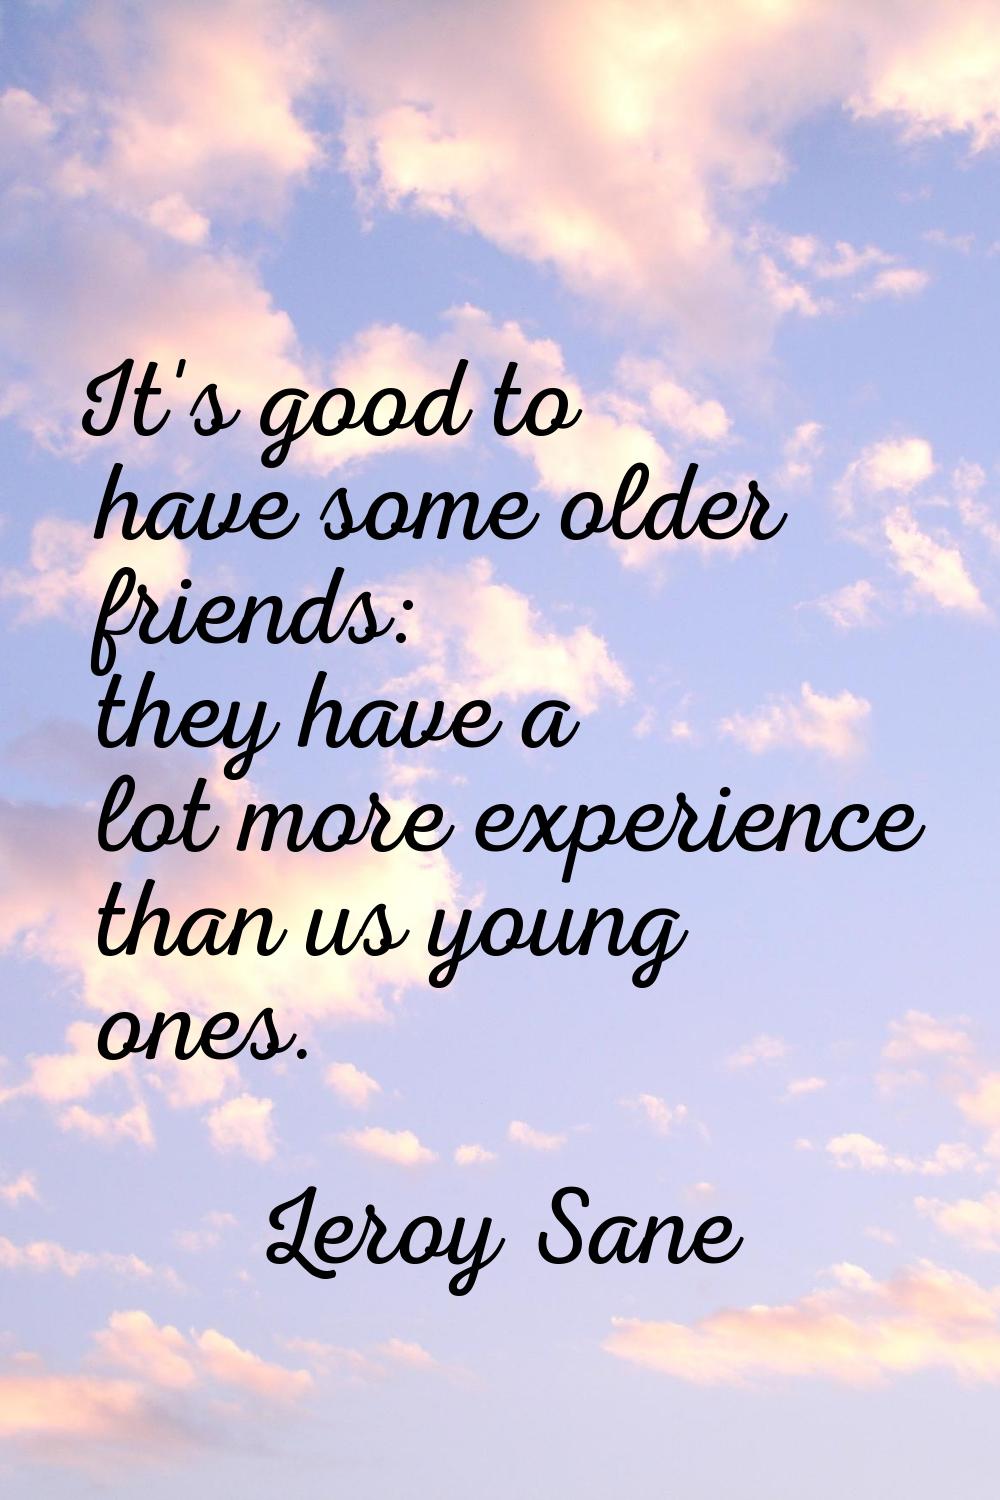 It's good to have some older friends: they have a lot more experience than us young ones.